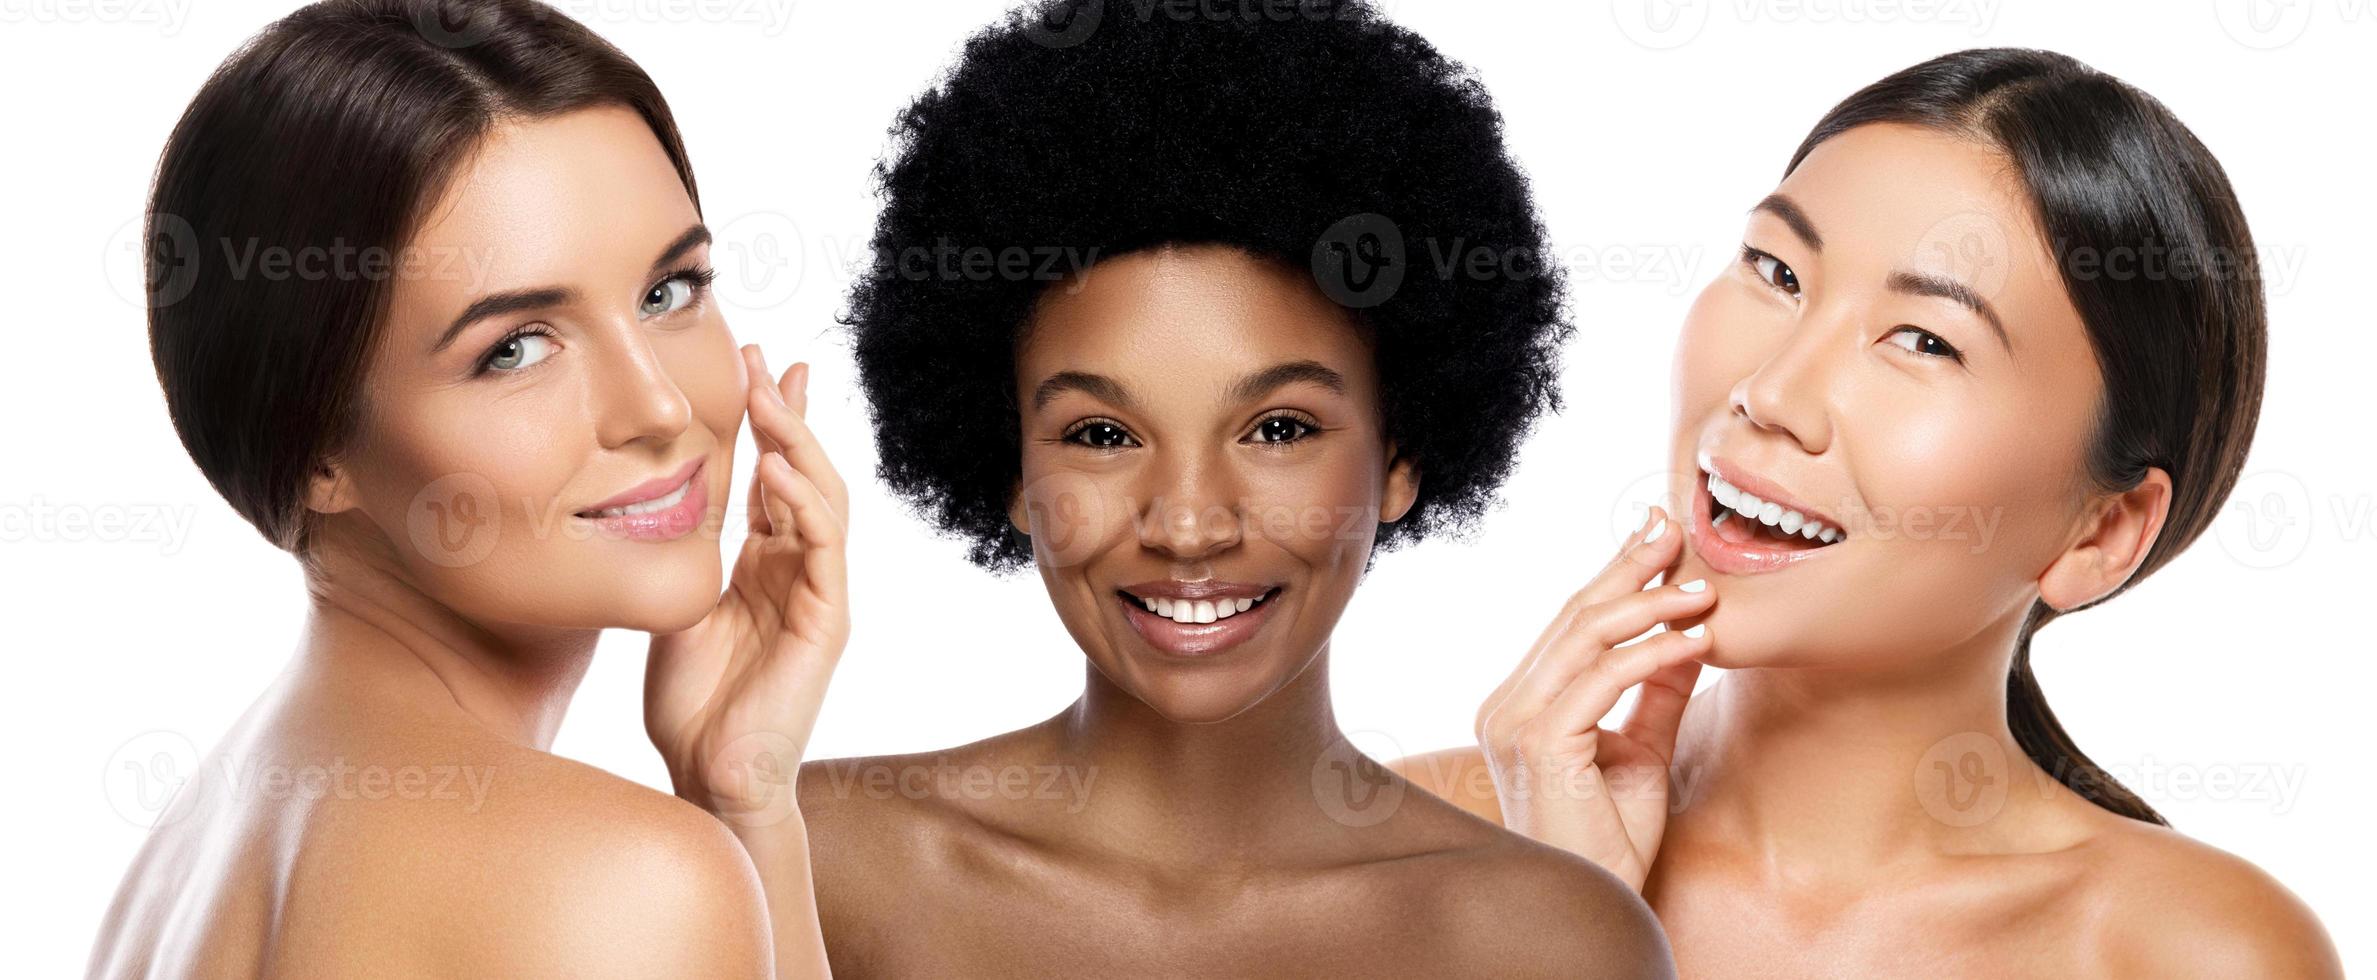 Different ethnicity women - Caucasian, African, Asian on white background photo